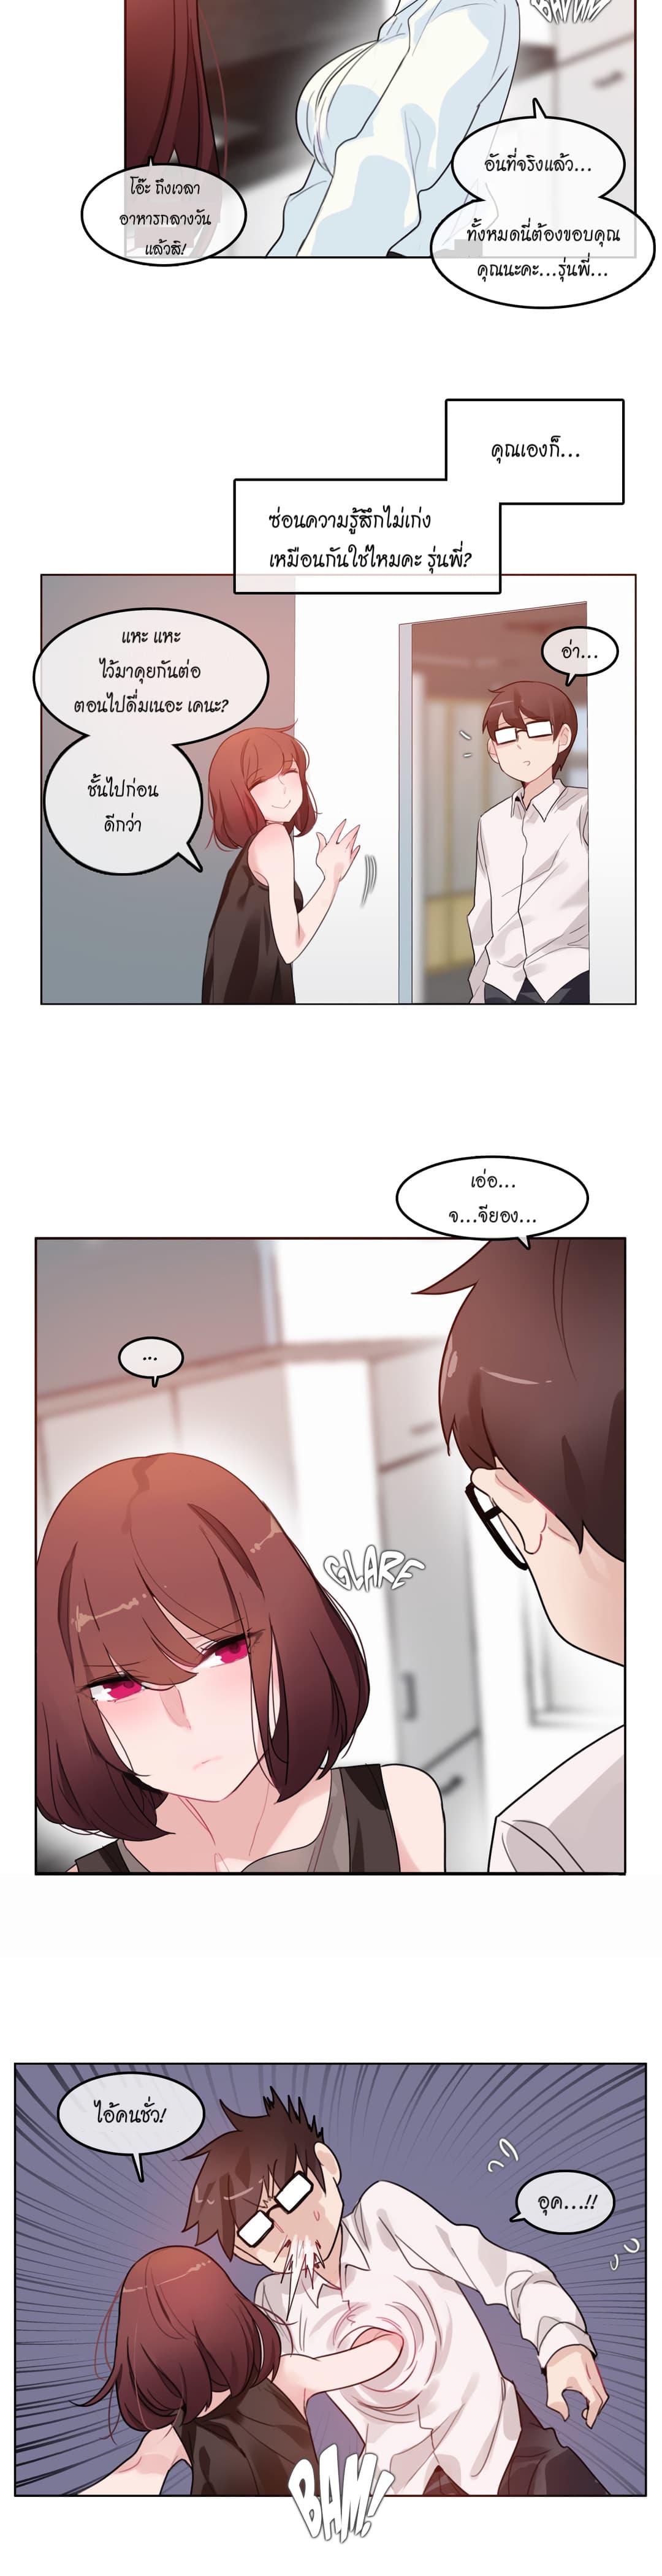 A Pervert’s Daily Life 32 (9)